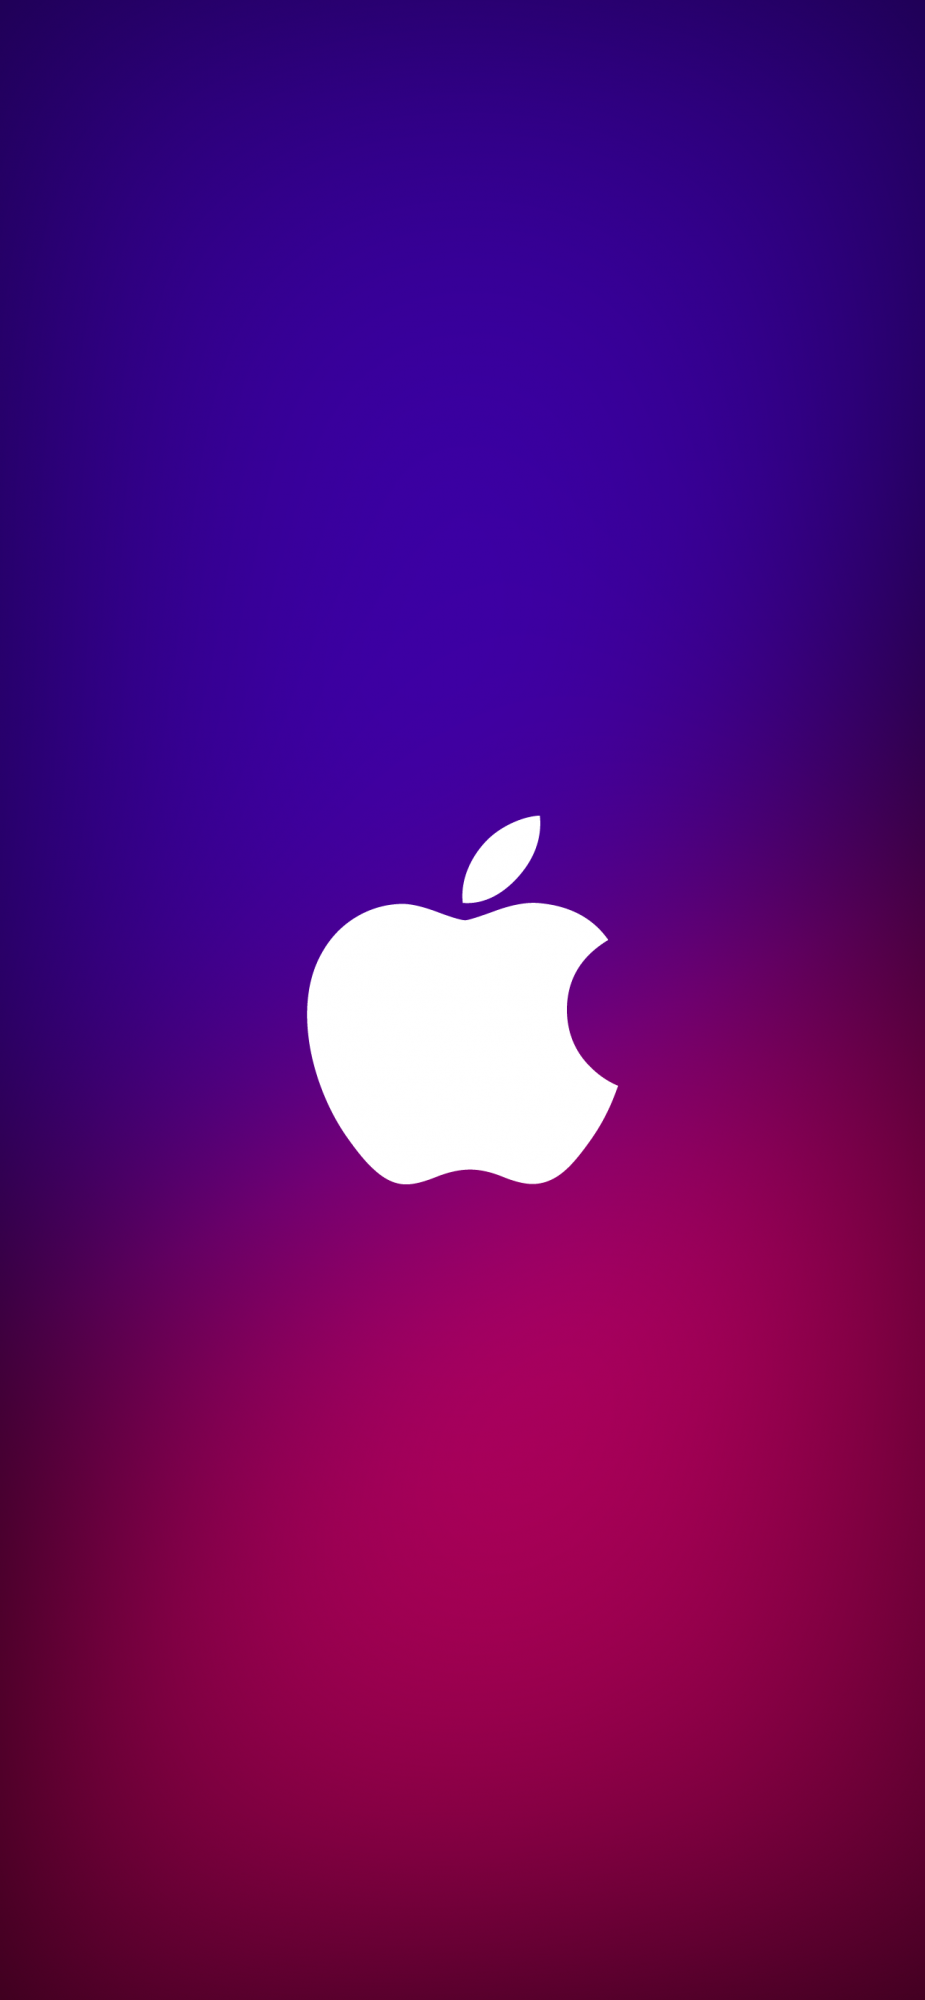 iPhone Logo Colored Wallpapers - Wallpaper Cave